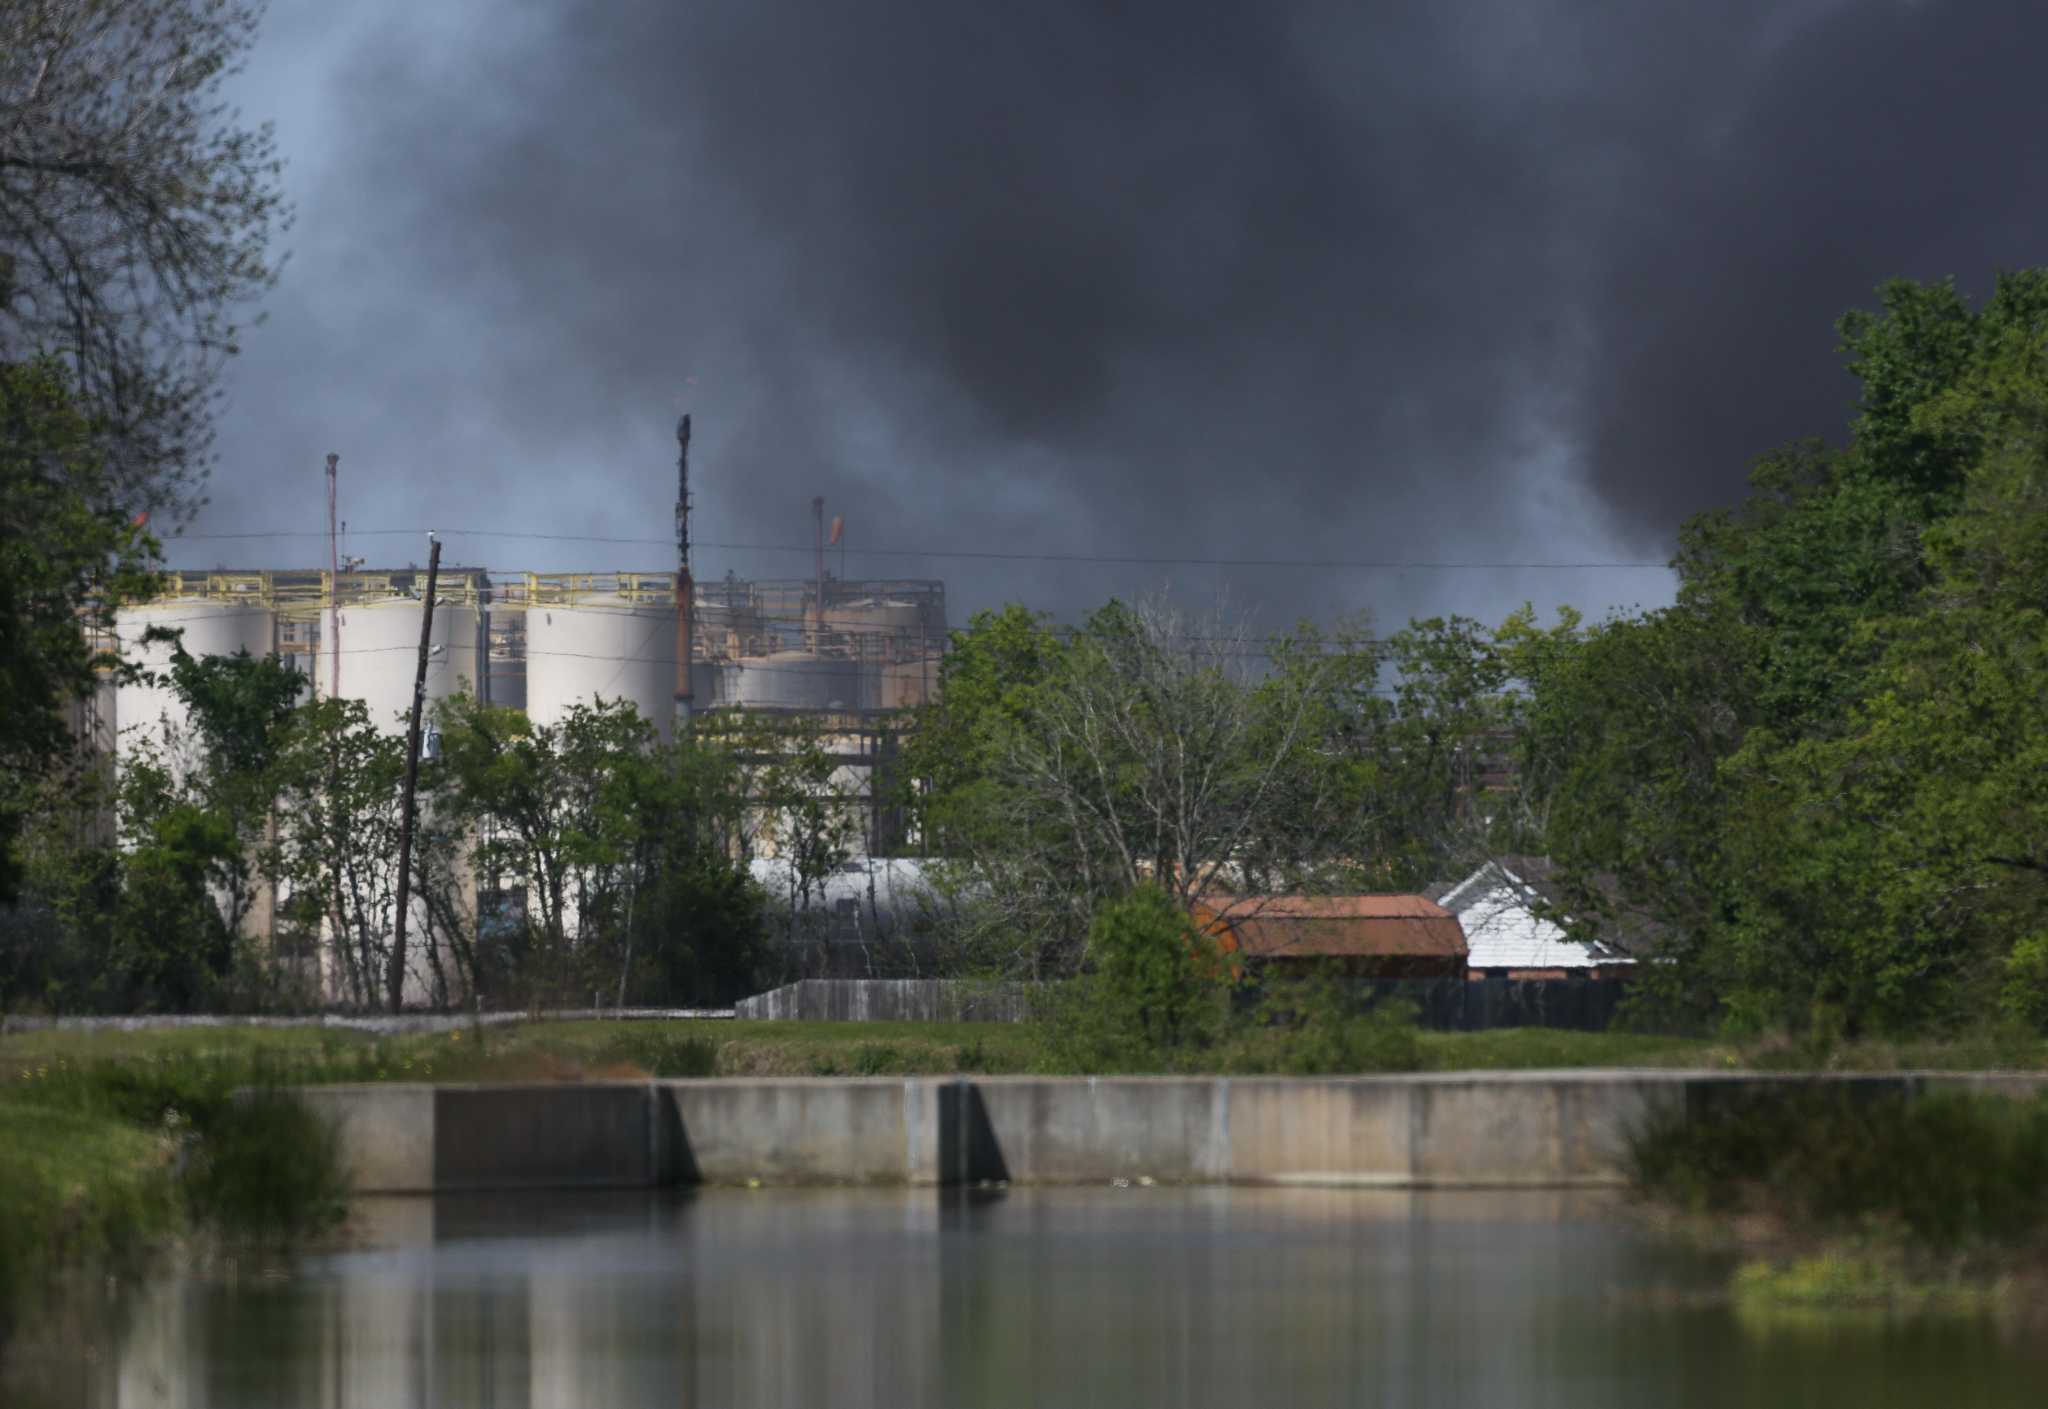 Lawsuit: KMCO officials aware of valve leak before chemical plant explosion - Houston ...